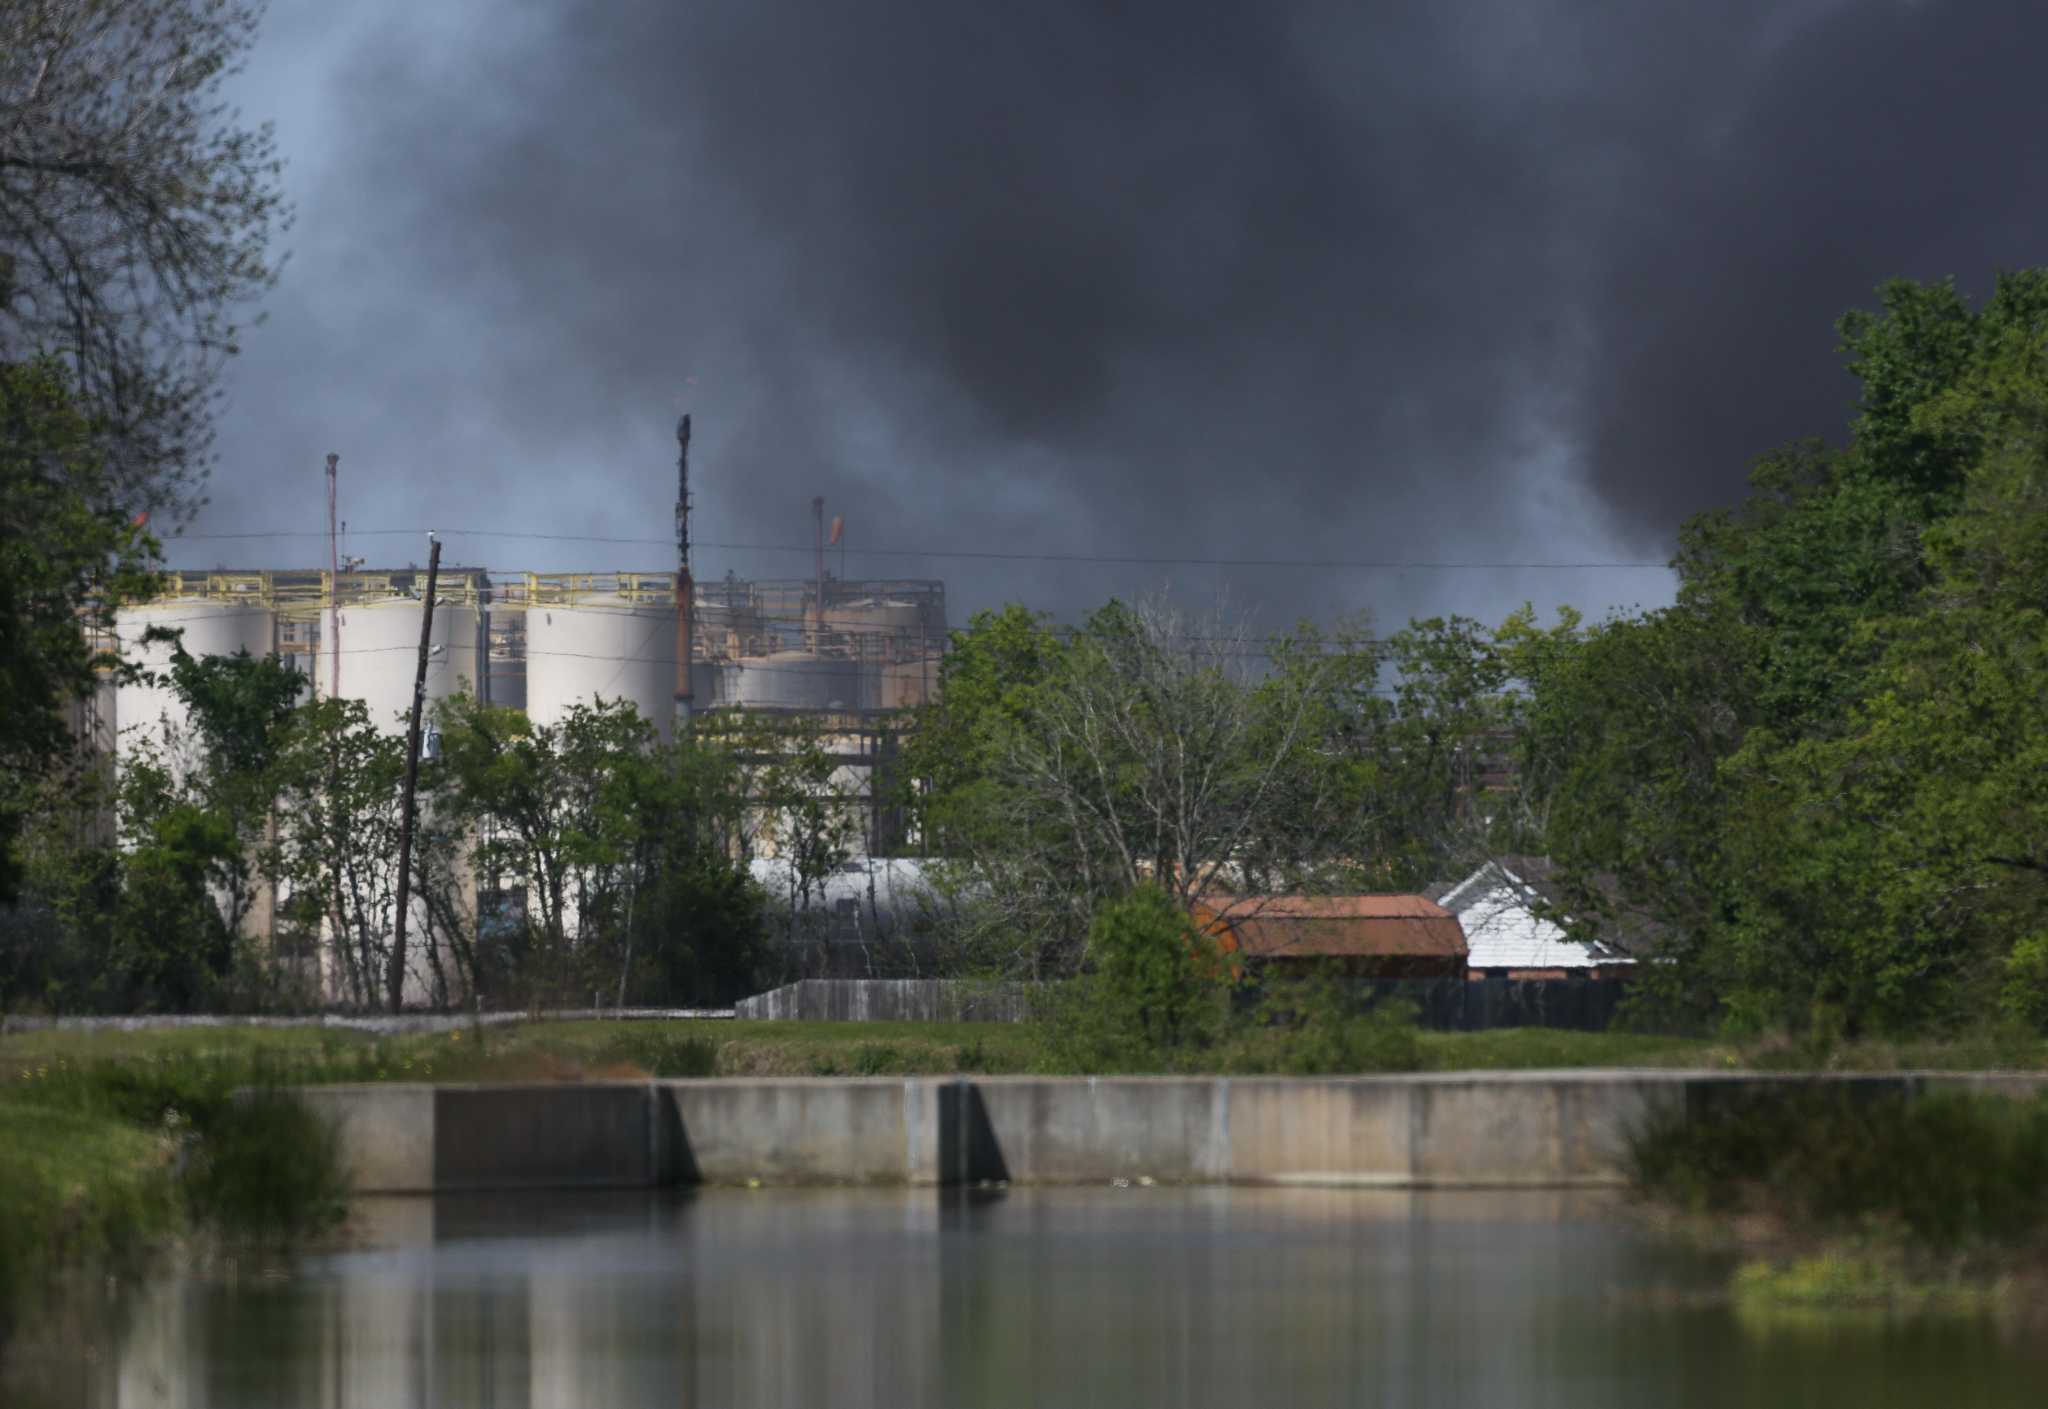 Lawsuit: KMCO officials aware of valve leak before chemical plant explosion - Houston ...